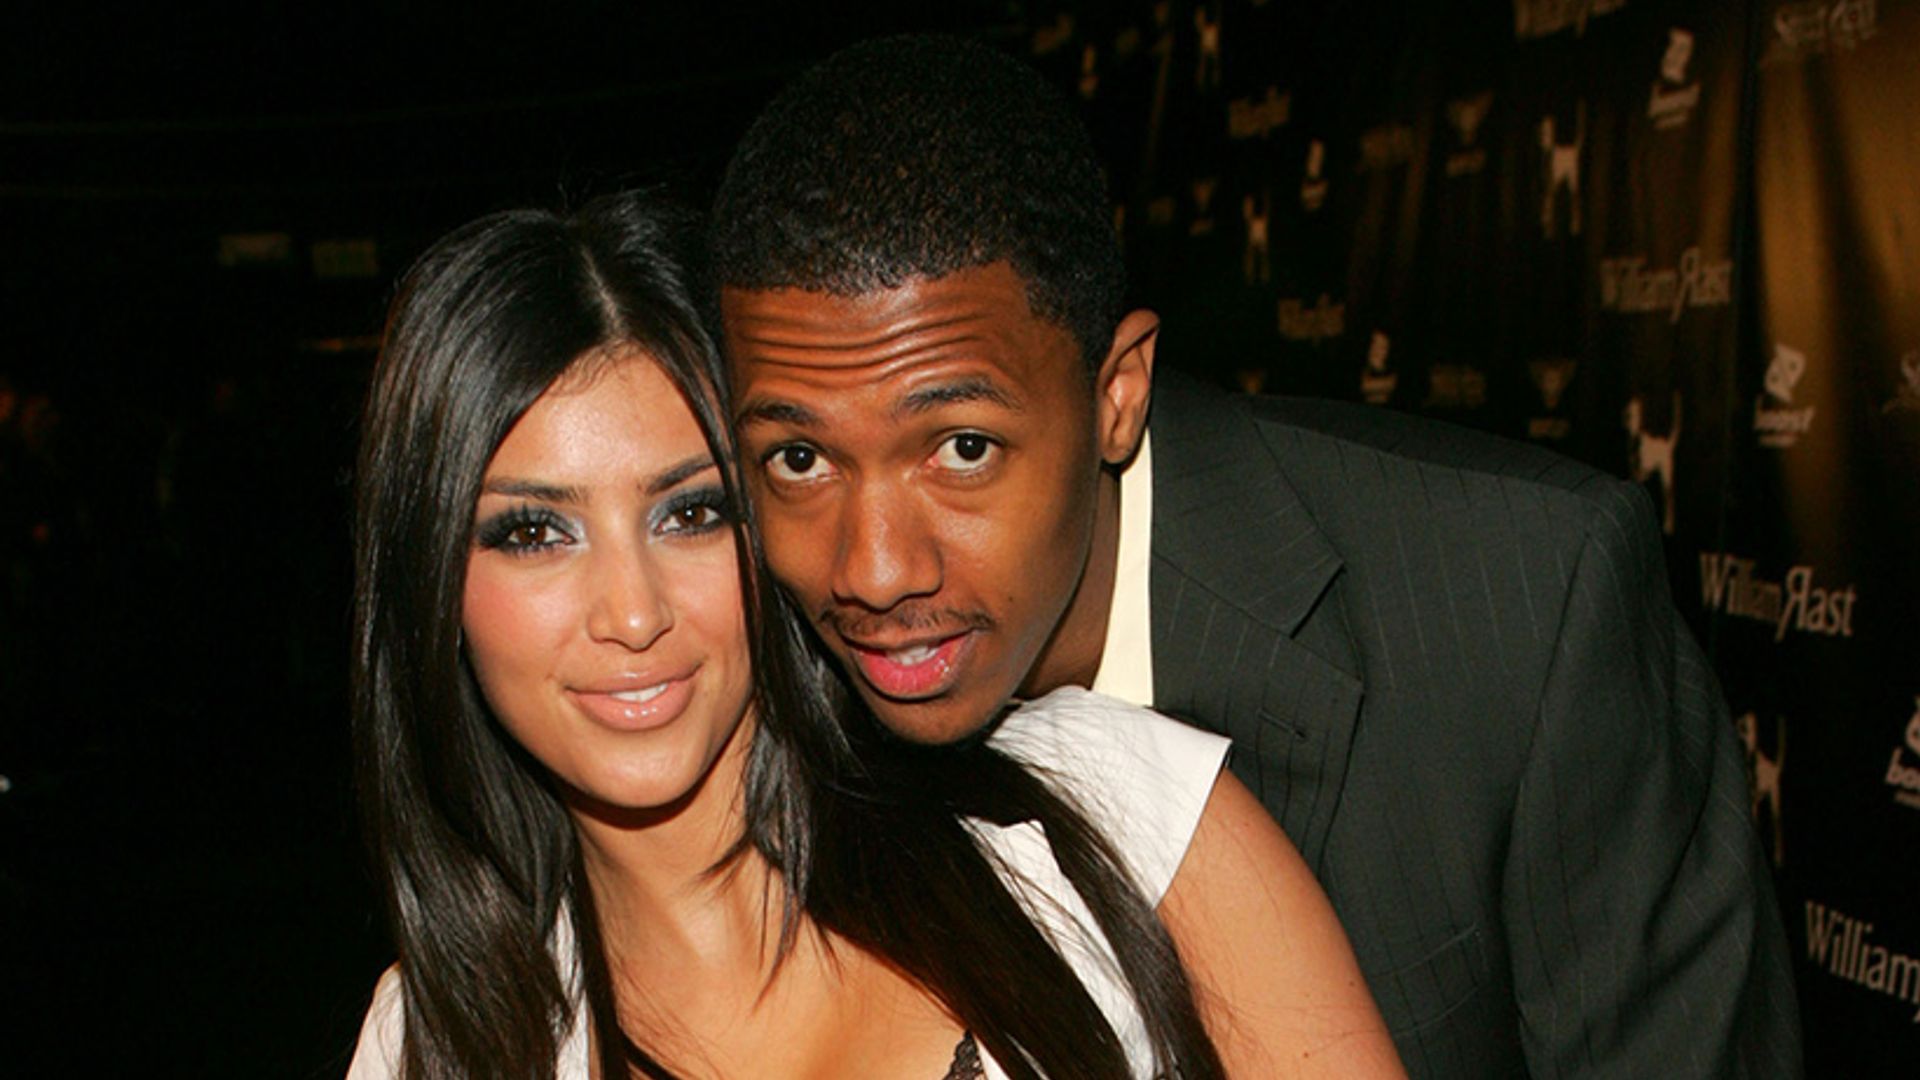 Nick Cannon shares unrecognisable photo of Kim Kardashian - click to see!